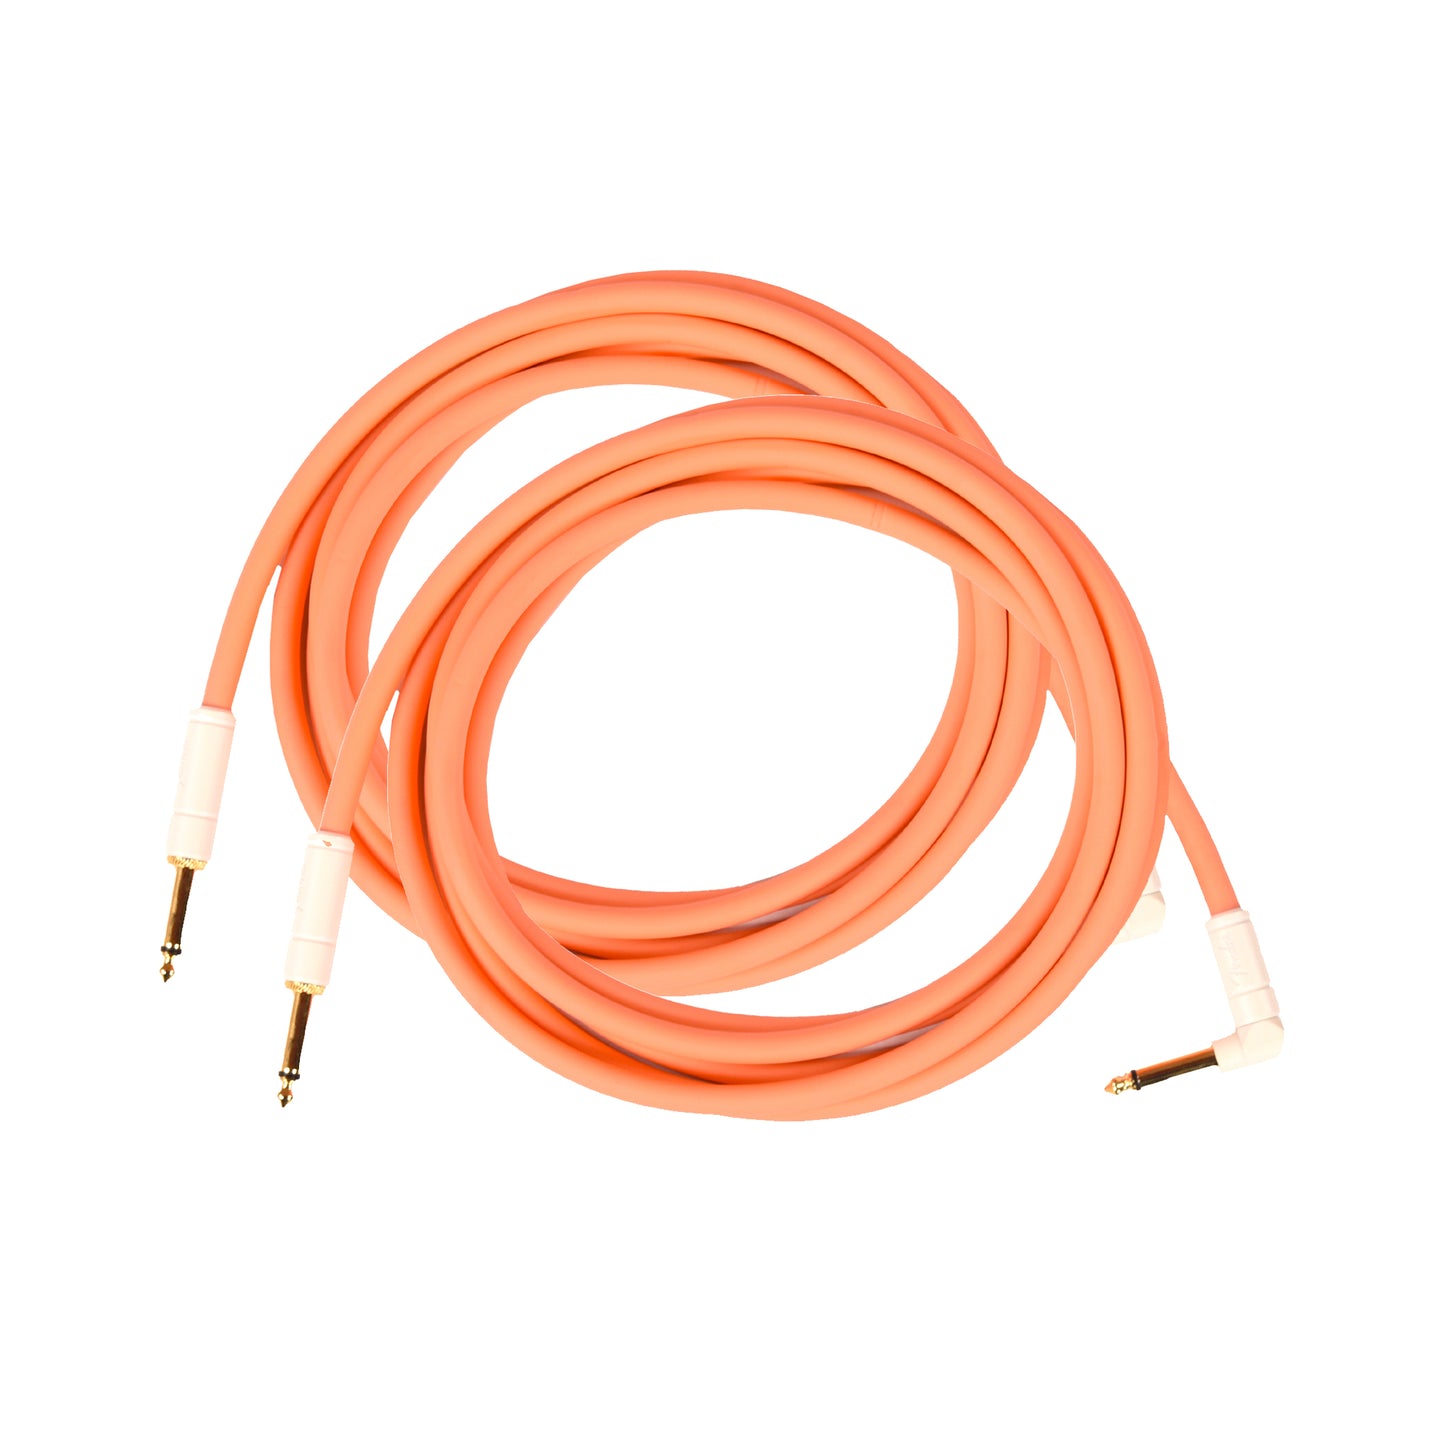 Fender Deluxe Instrument Cable Pacific Peach 15' Angle-Straight 2 Pack Bundle